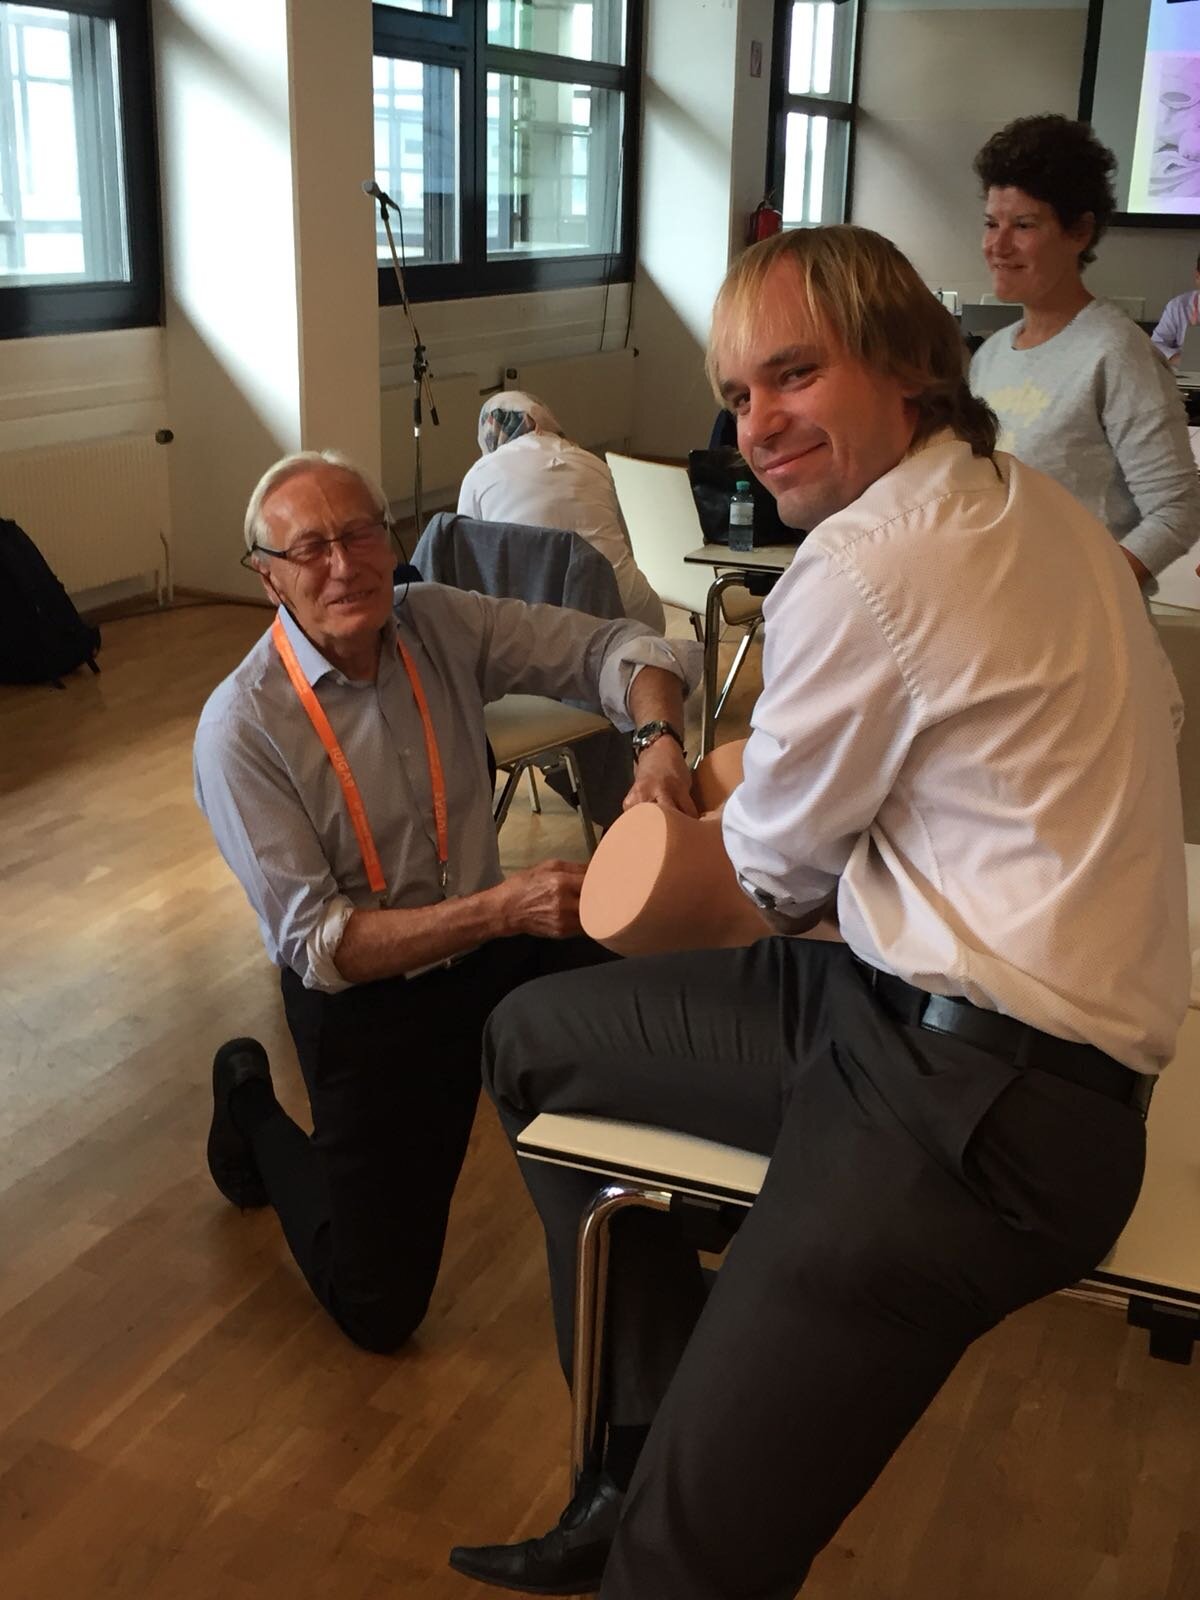 2018 - PEERS workshop in Vienna; even the founder of French urogynecology, prof. Jacquetin, attended the workshop to obtain experience